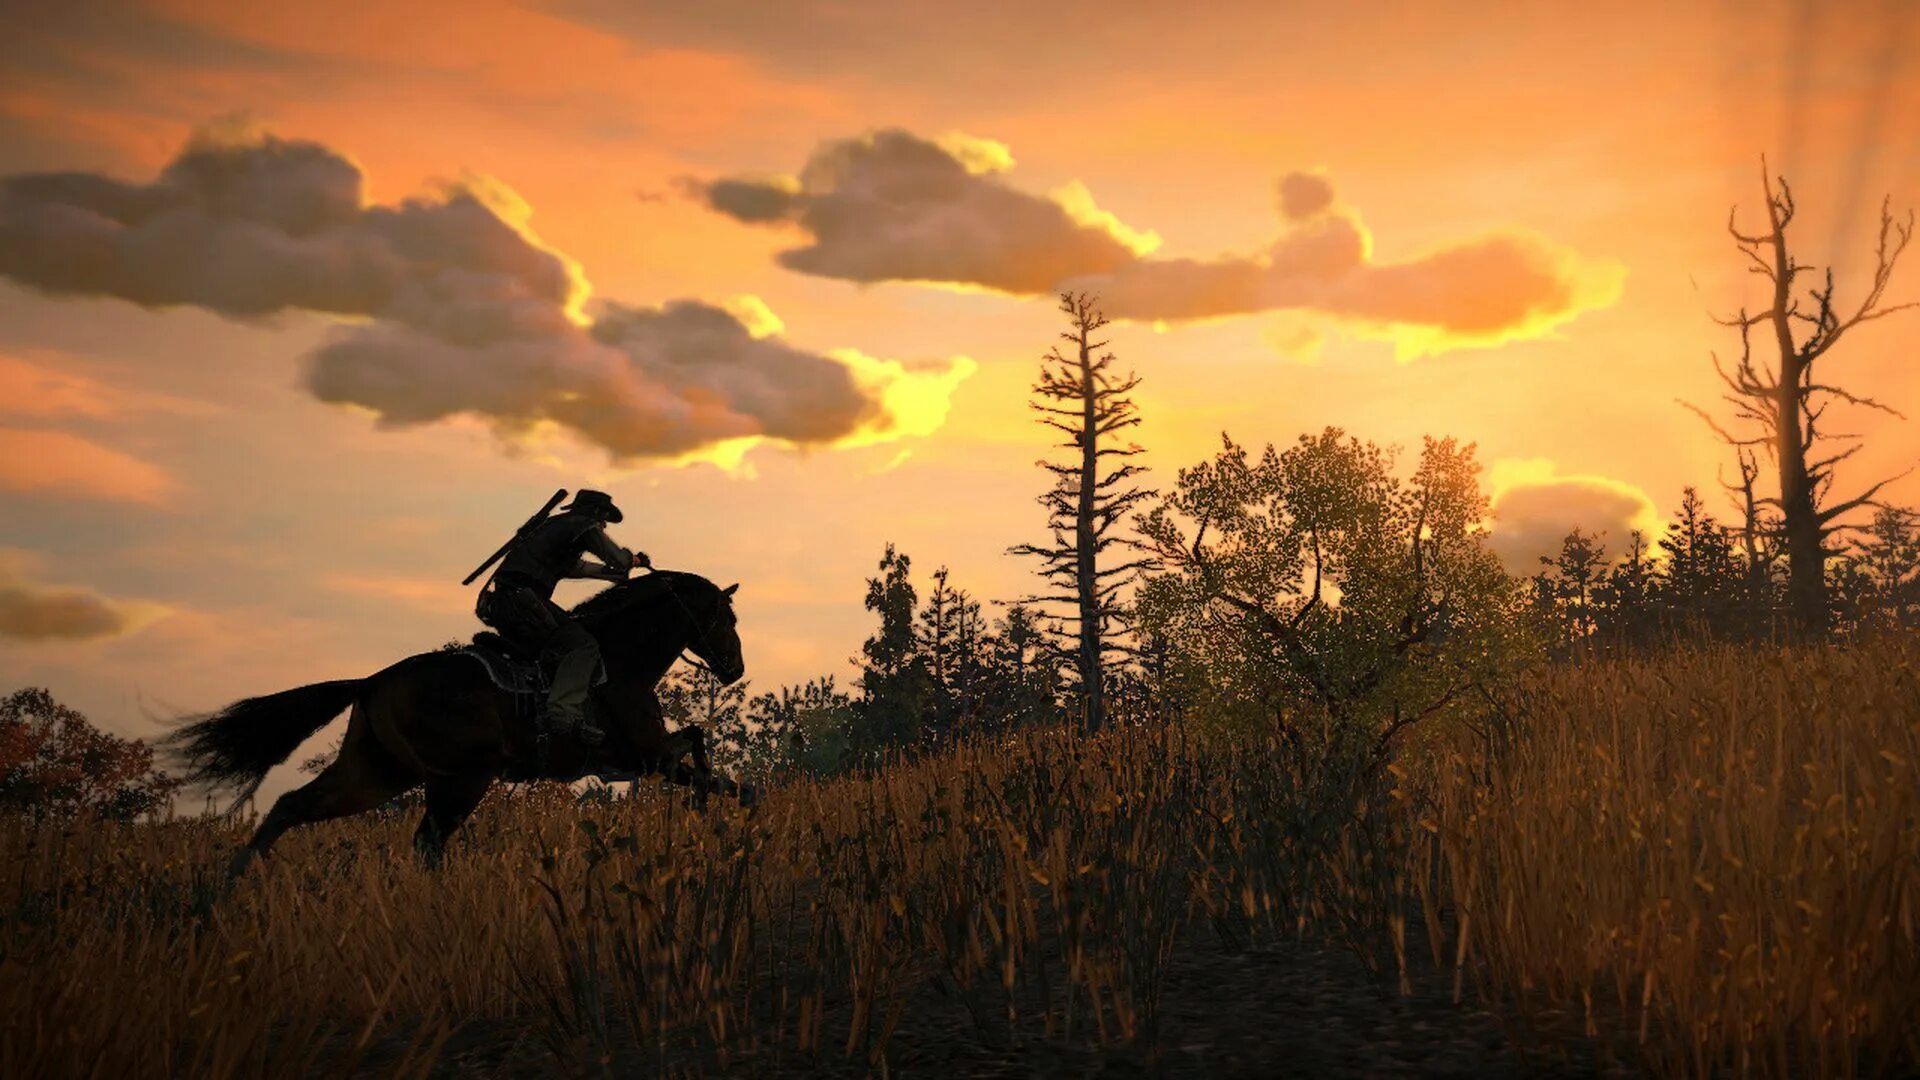 Rdr 2 Xbox 360. Red Dead Redemption 1. Red Dead Redemption 2010. Red Dead Redemption 2 Sunset. Red dead redemption series